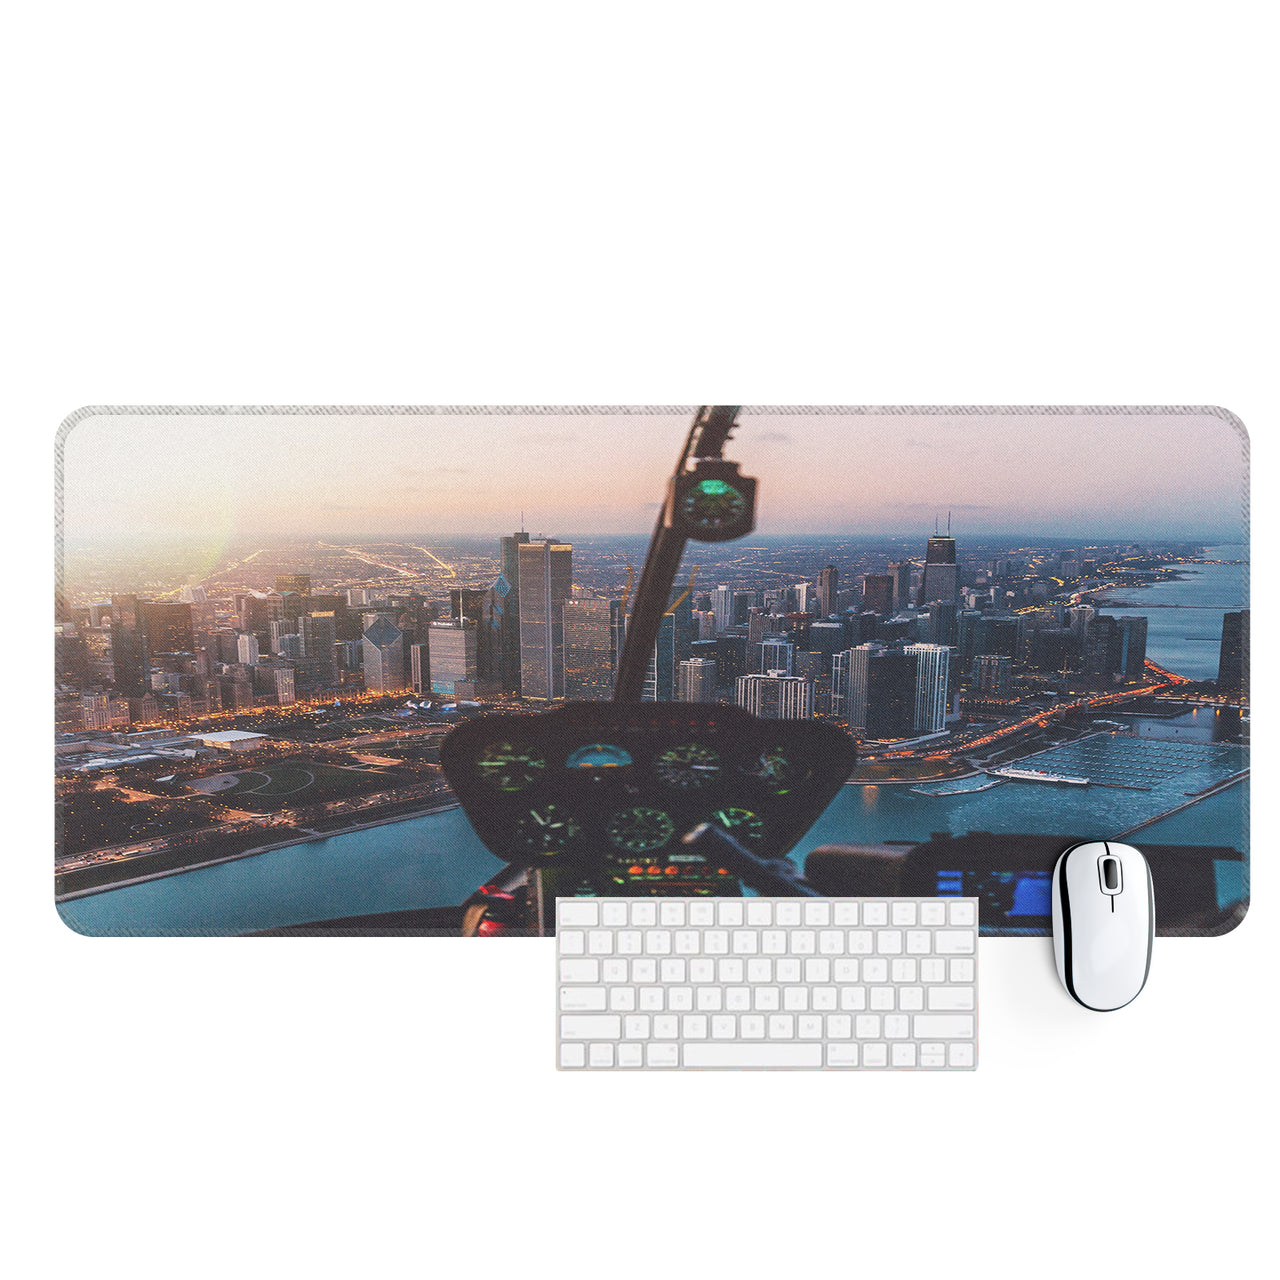 Amazing City View from Helicopter Cockpit Designed Desk Mats